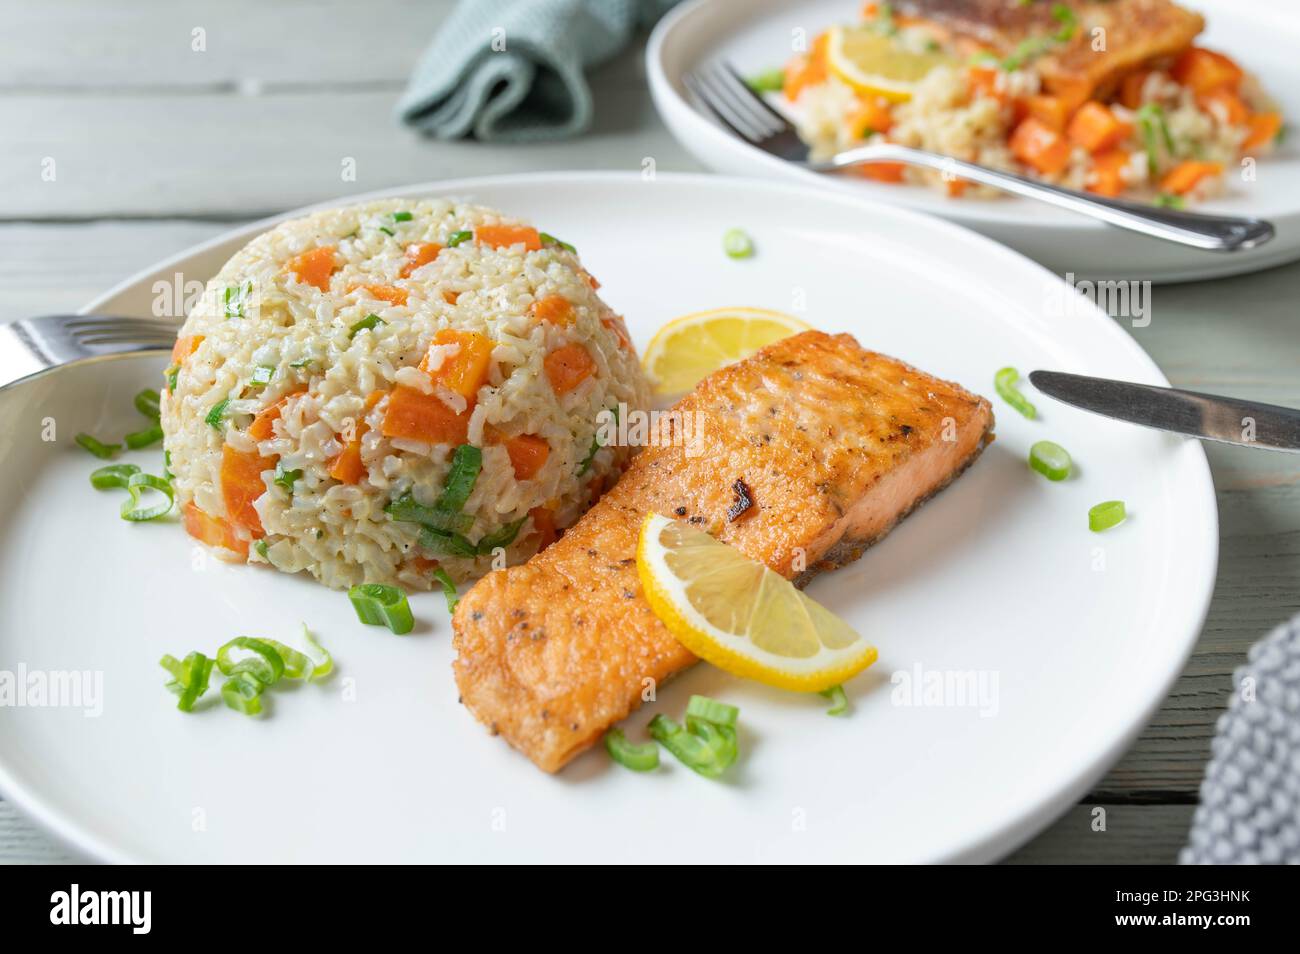 Fried salmon with brown rice, peas, carrots and leek on a plate Stock Photo